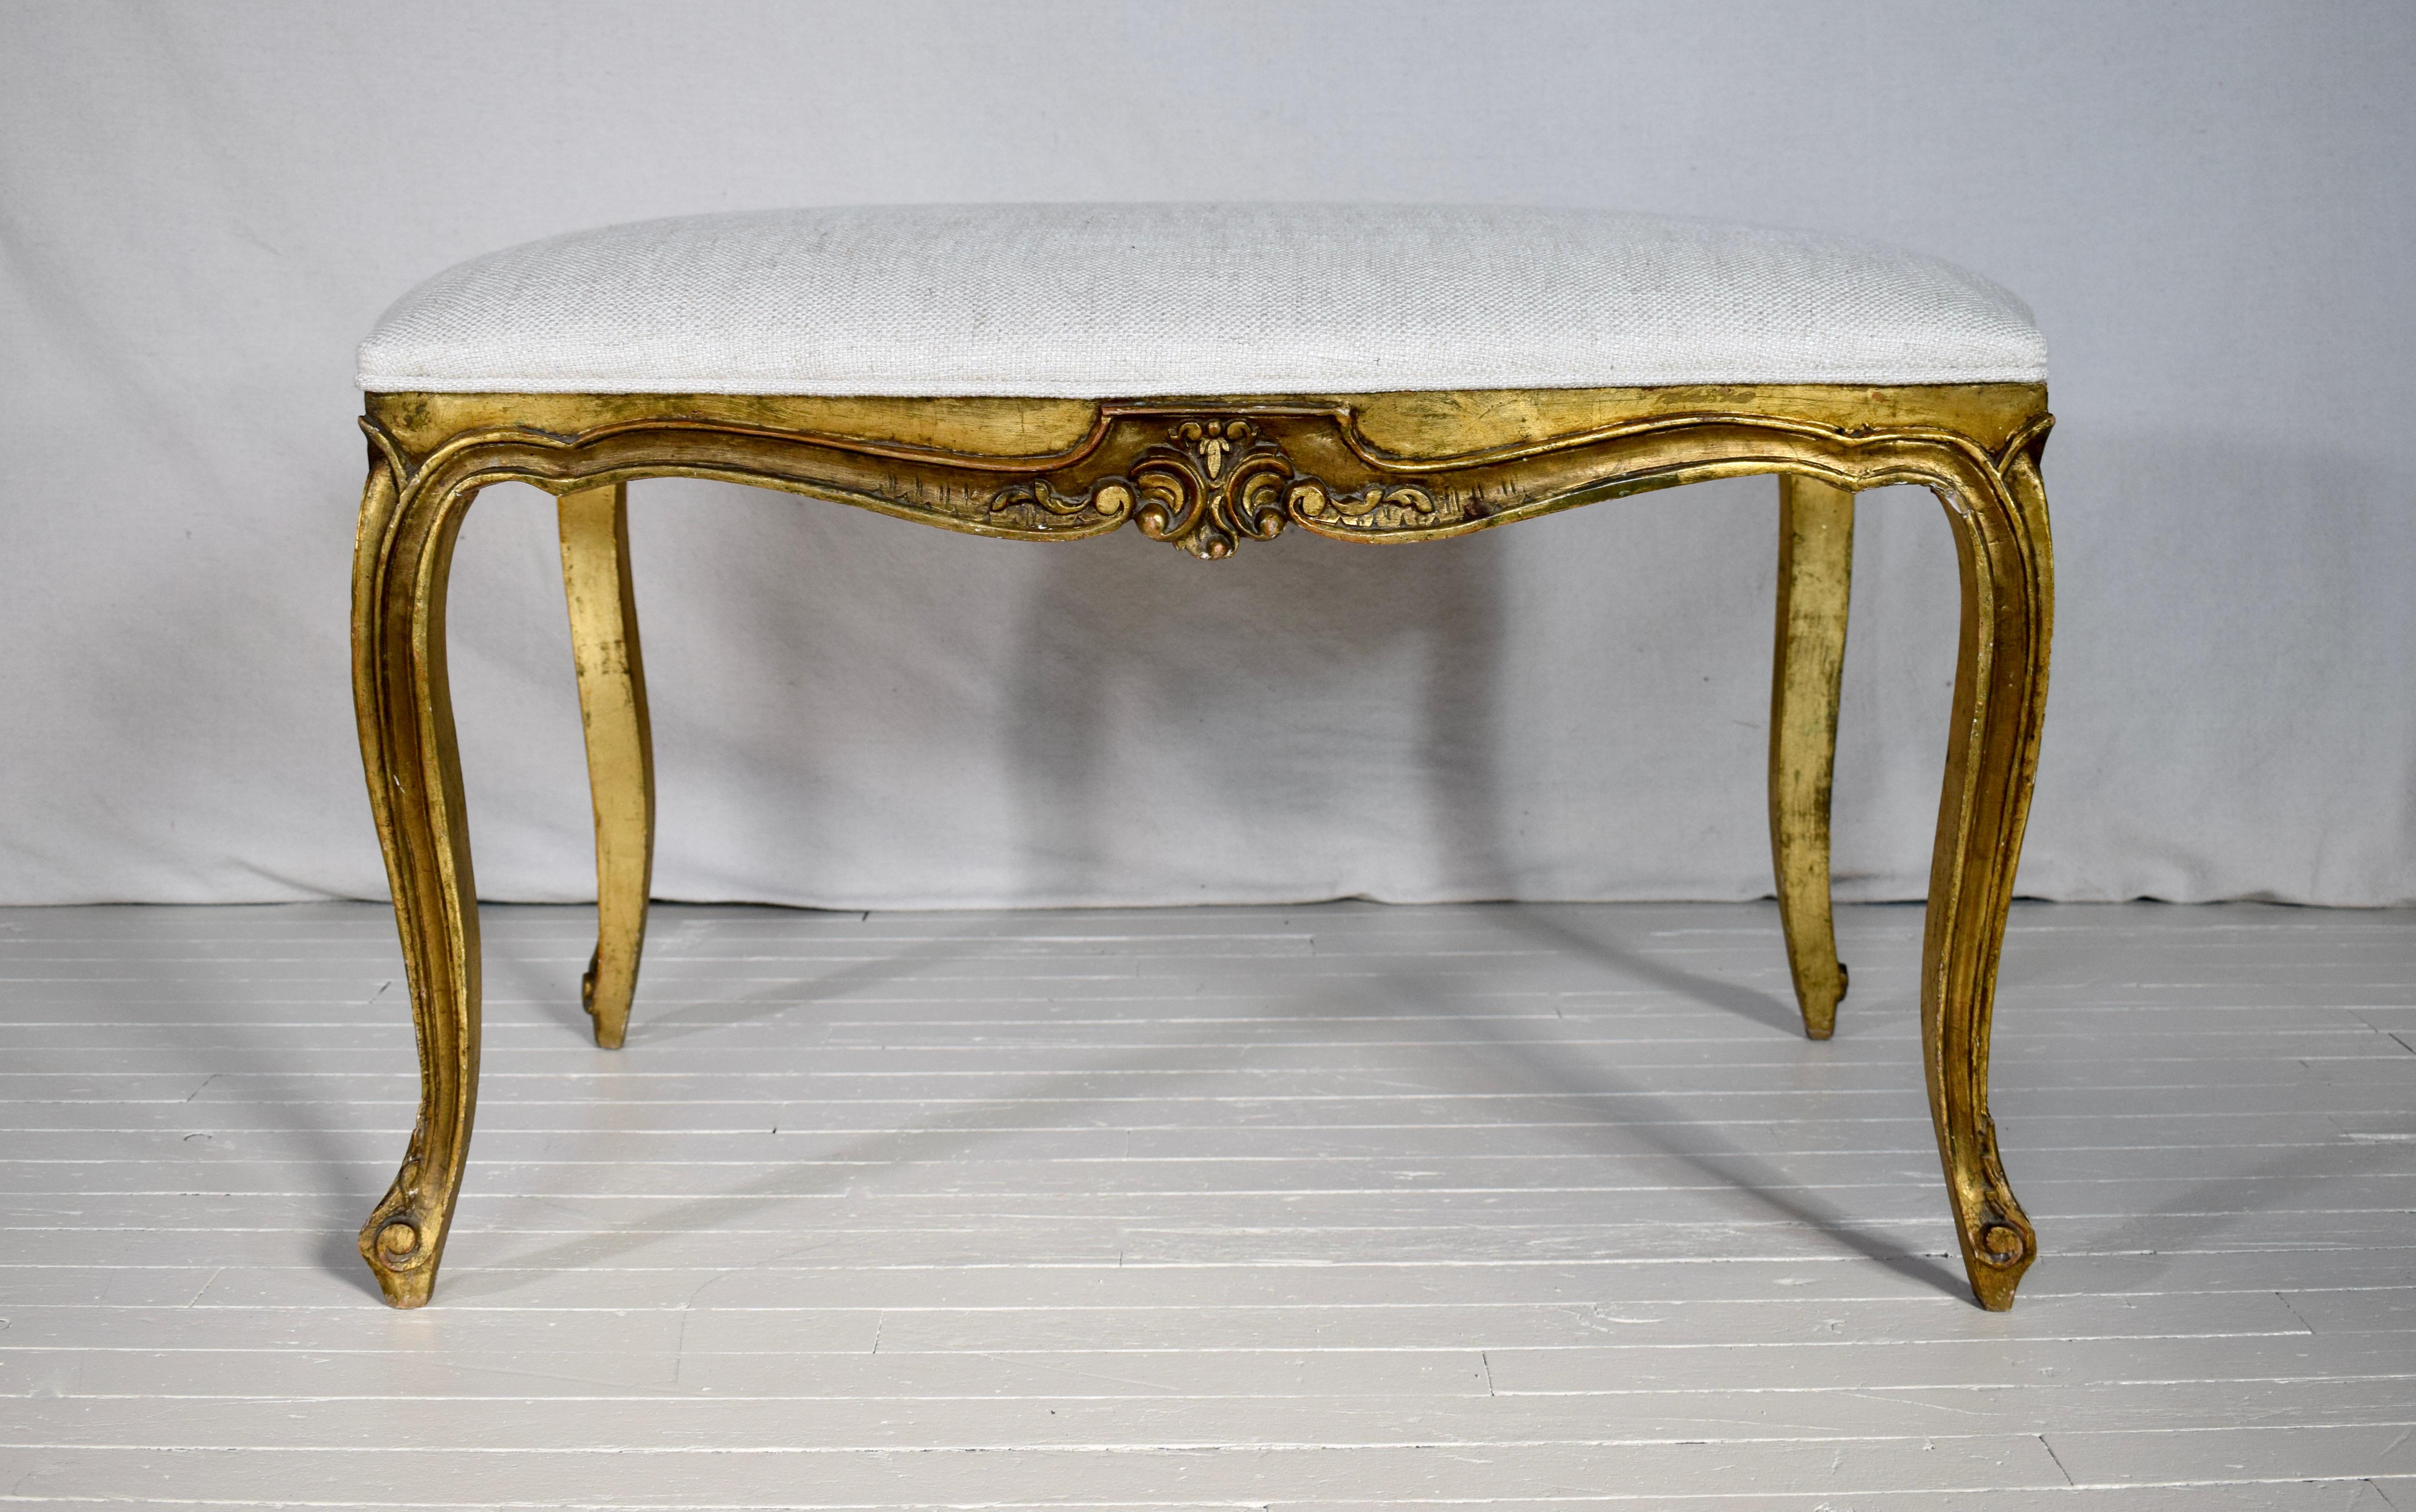 Late 19th early 20th c. French Louis XV Style Giltwood bench with intricate hand carvings & warm patina to the all original gold leaf gilt finish. Features new antique white woven cotton upholstery.